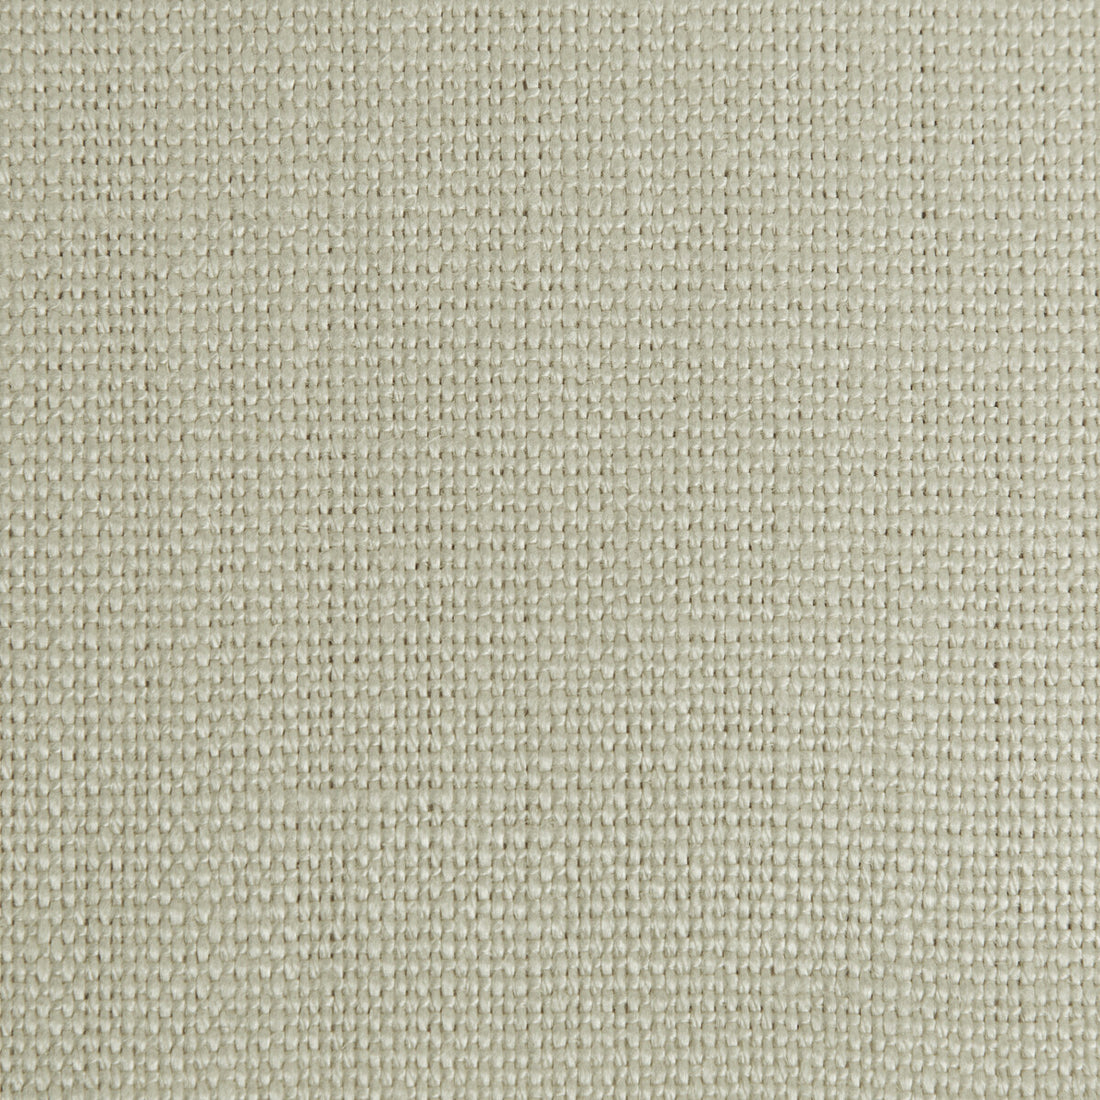 Kravet Couture fabric in 34813-2211 color - pattern 34813.2211.0 - by Kravet Couture in the Mabley Handler collection